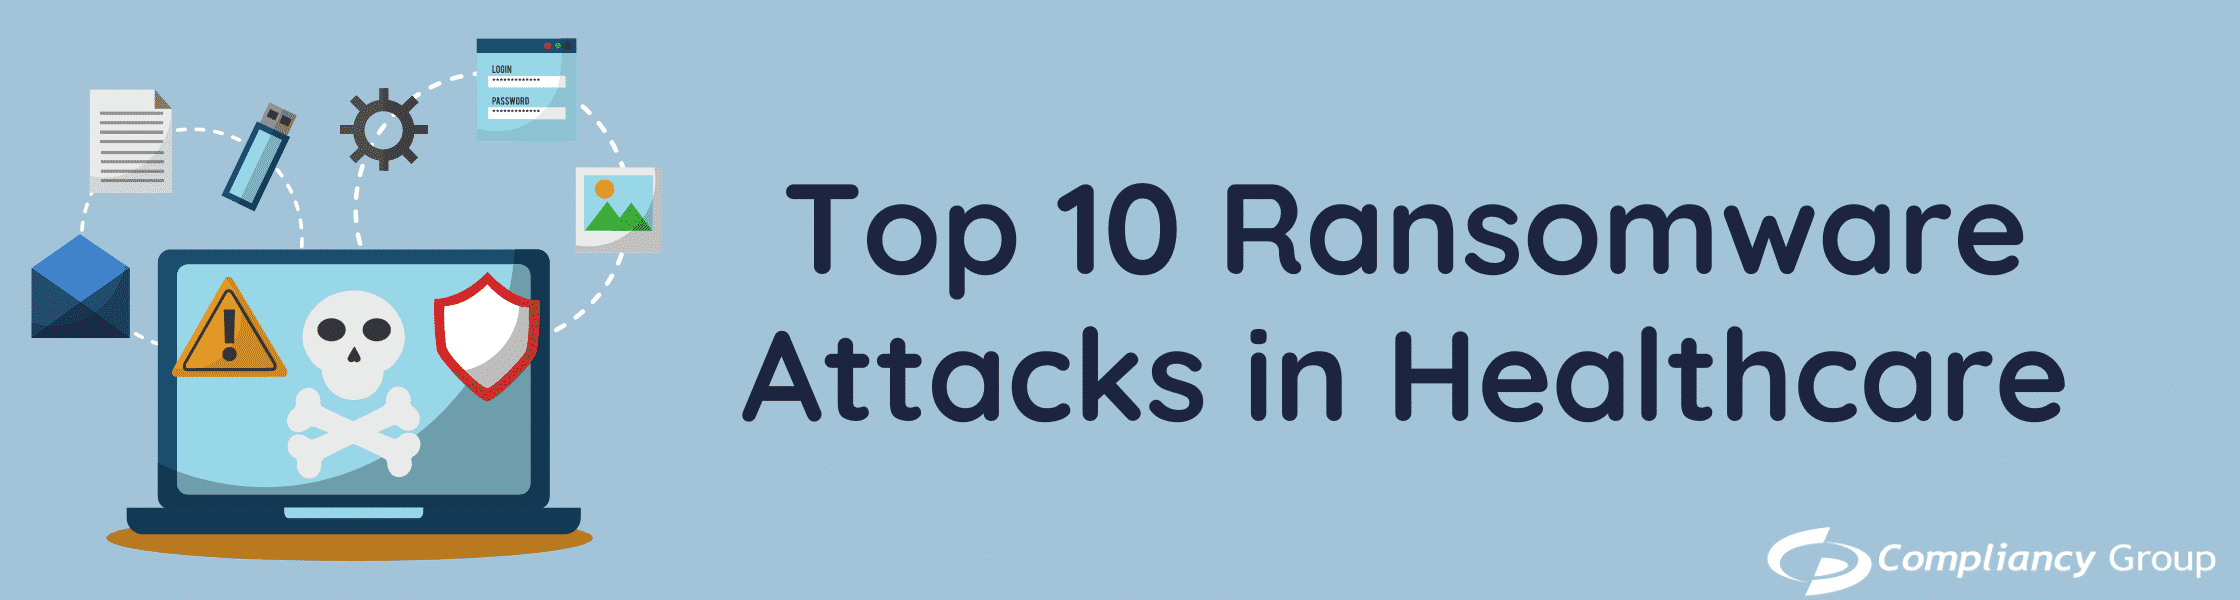 Top 10 Ransomware Attacks in Healthcare